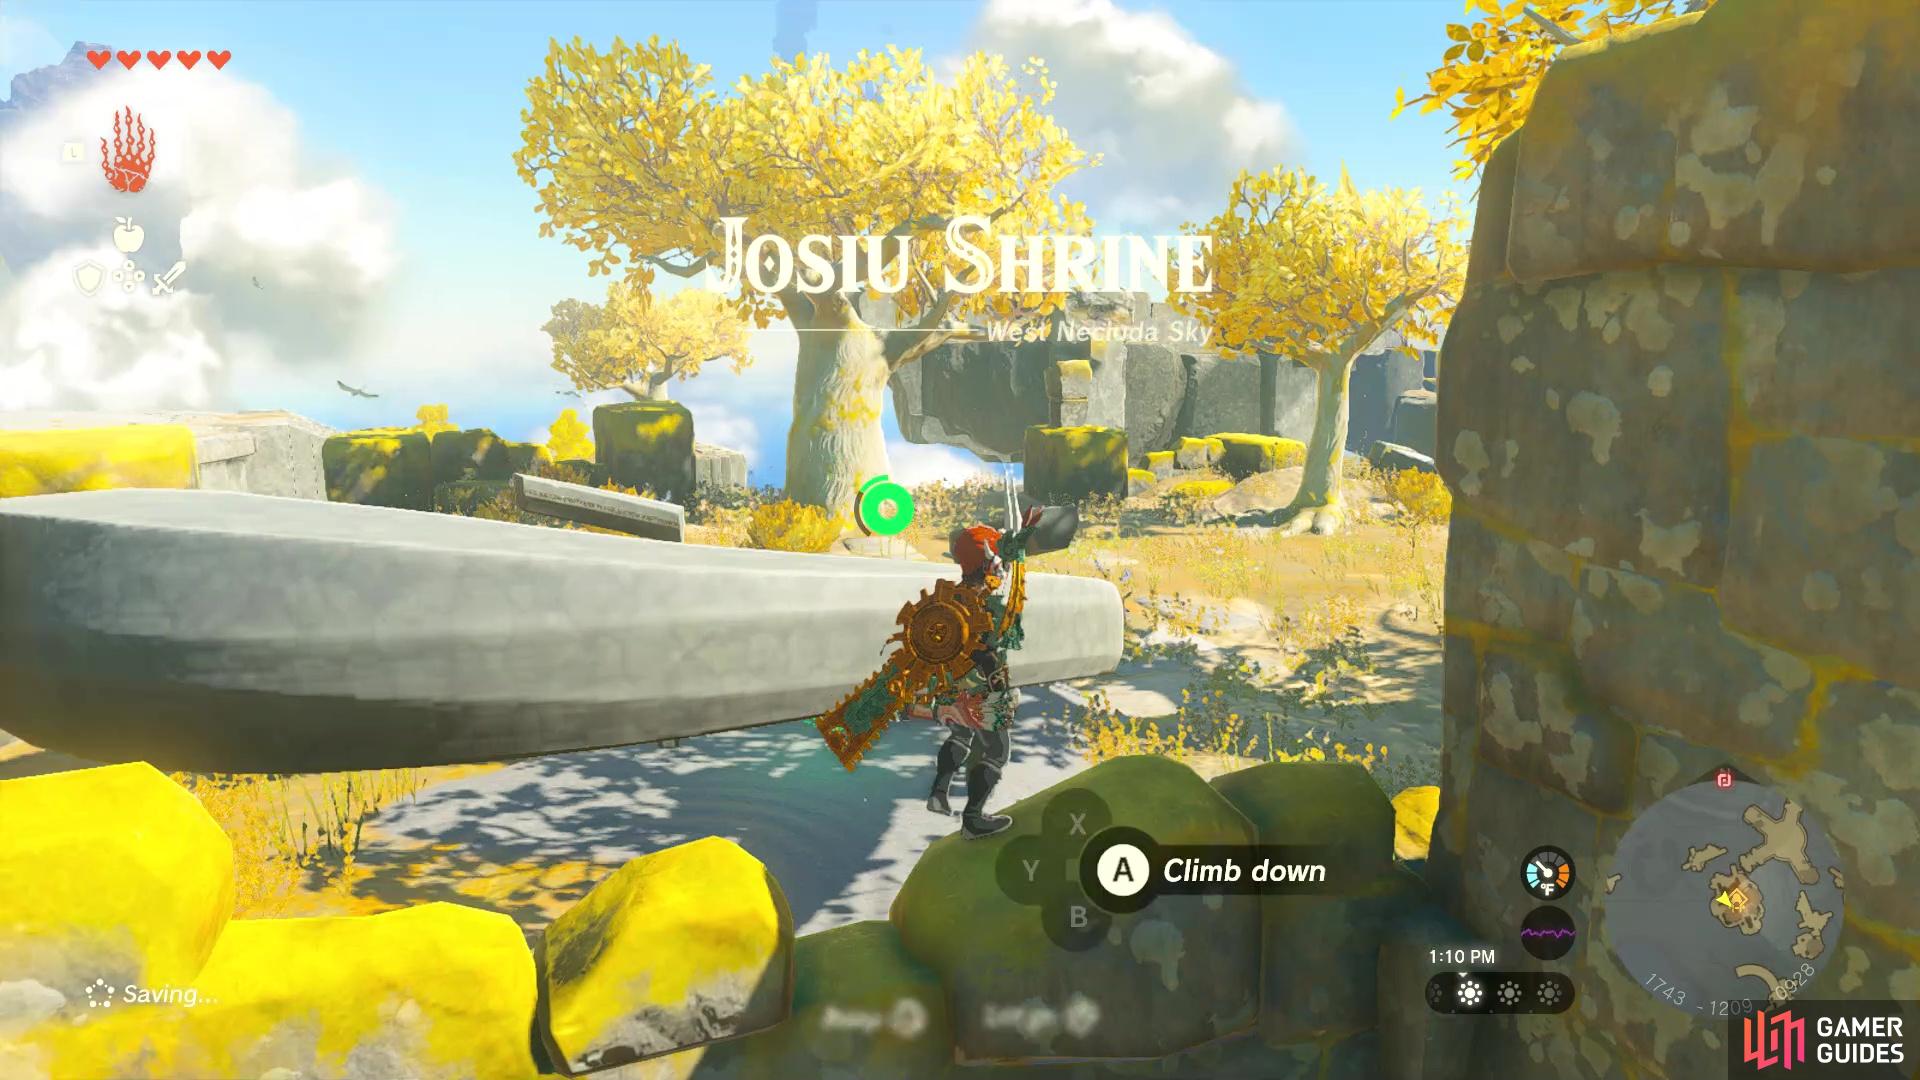 The Josiu Shrine will require you to find the crystal for it first